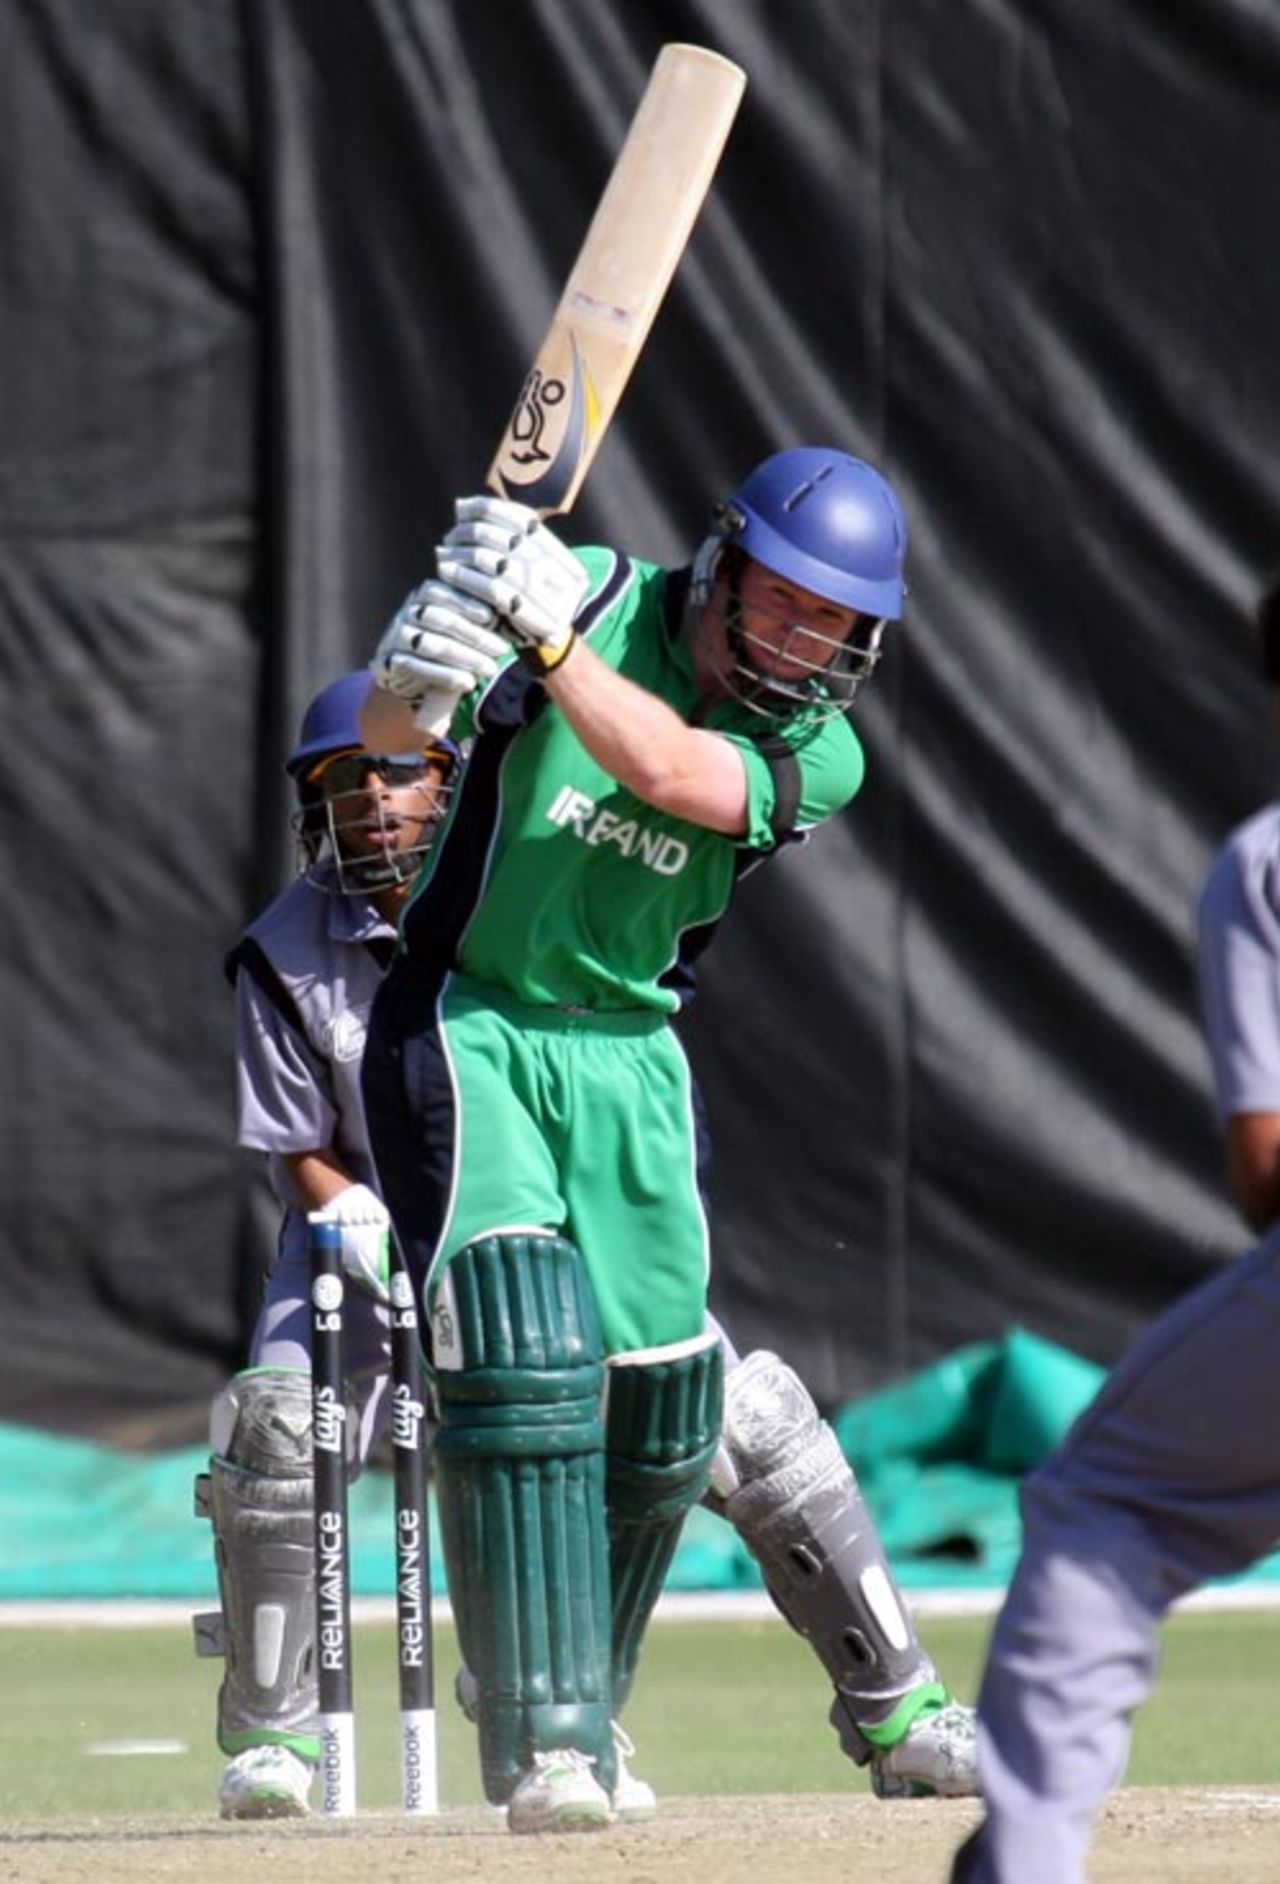 Ireland's Eoin Morgan drives on his way to an unbeaten 30, Ireland v UAE, ICC World Cup Qualifiers, Super Eights, Johannesburg, April 13, 2009